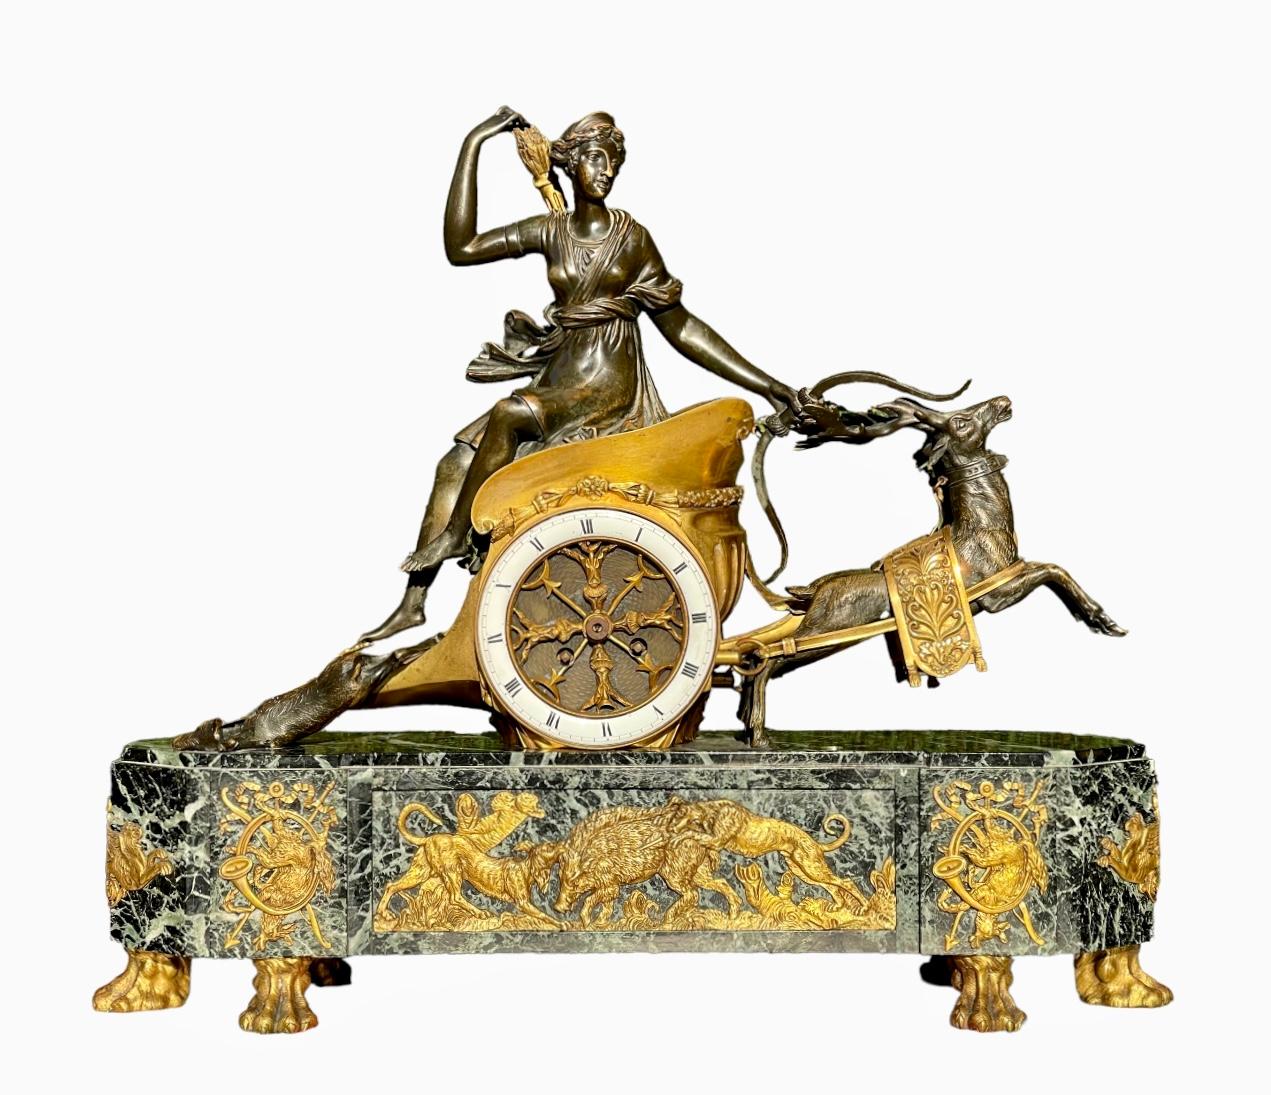 Superb Napoleon III period fireplace trim. It consists of an imposing clock in gilded and patinated bronze with a sea green marble base representing the goddess of the hunt, Diana the Huntress. She is standing on a chariot pulled by two deer. The